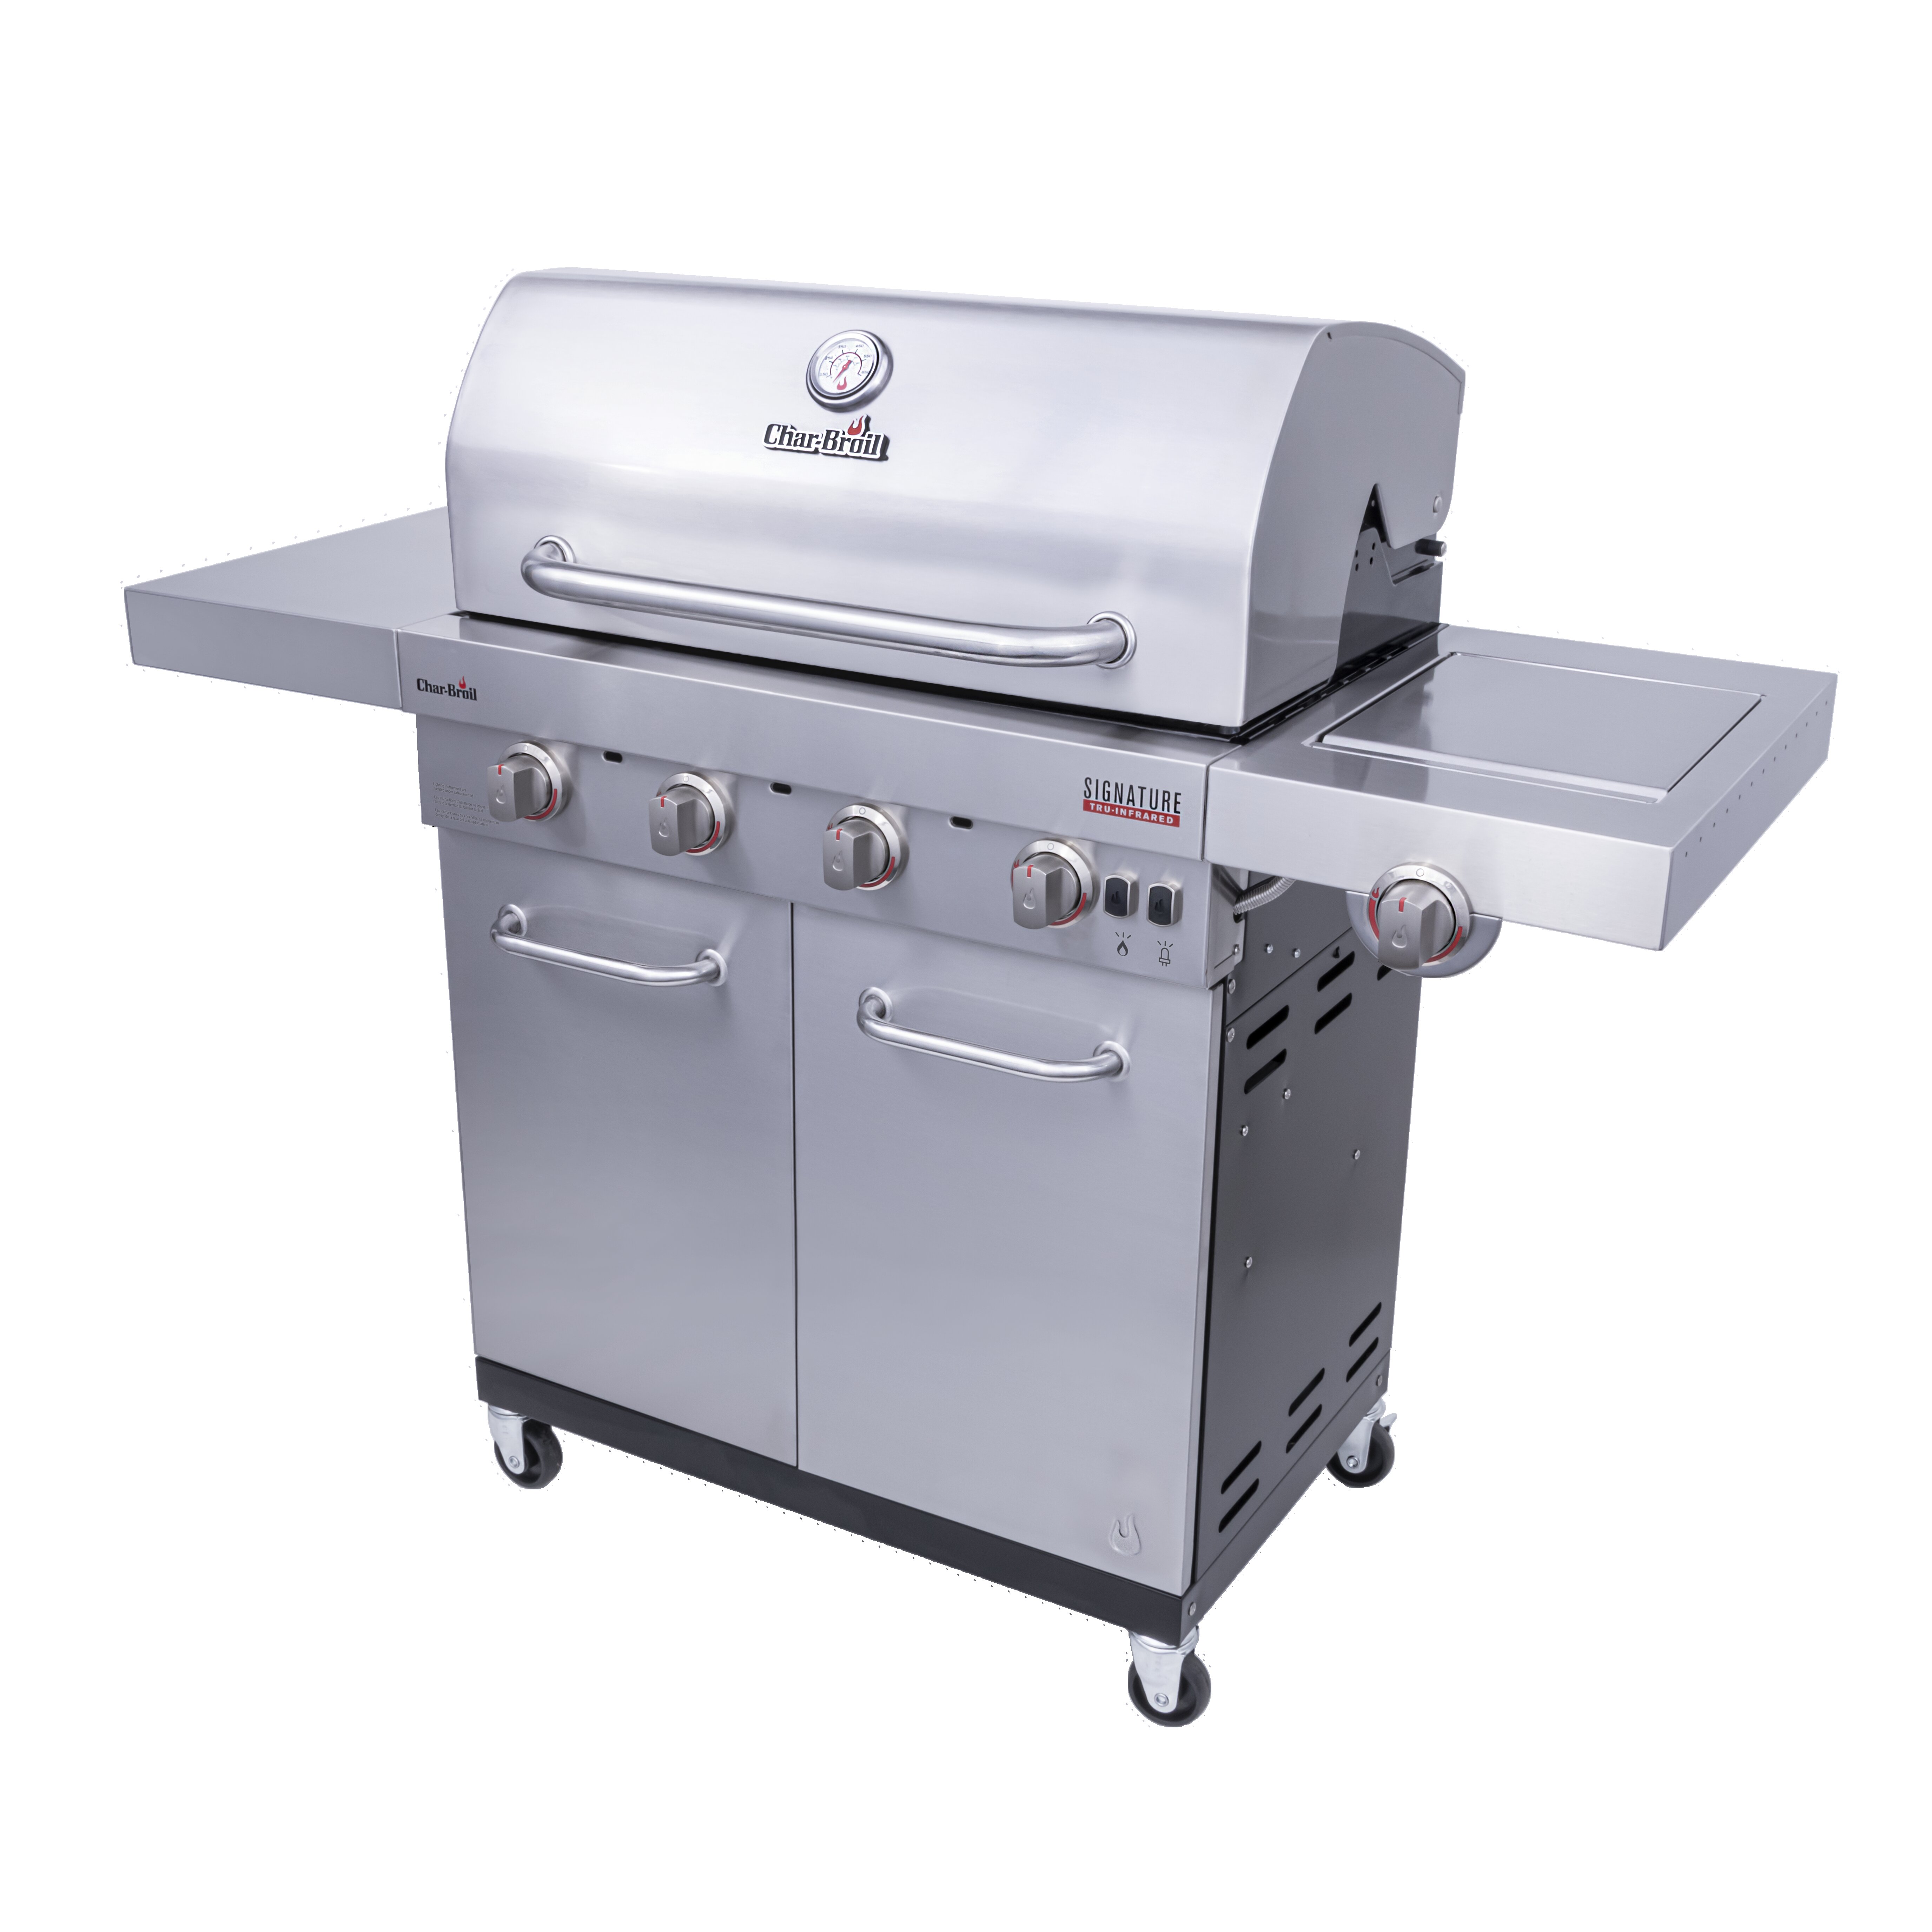 CharBroil Char-Broil 4-Burner Propane Gas Grill with Cabinet Reviews | Wayfair